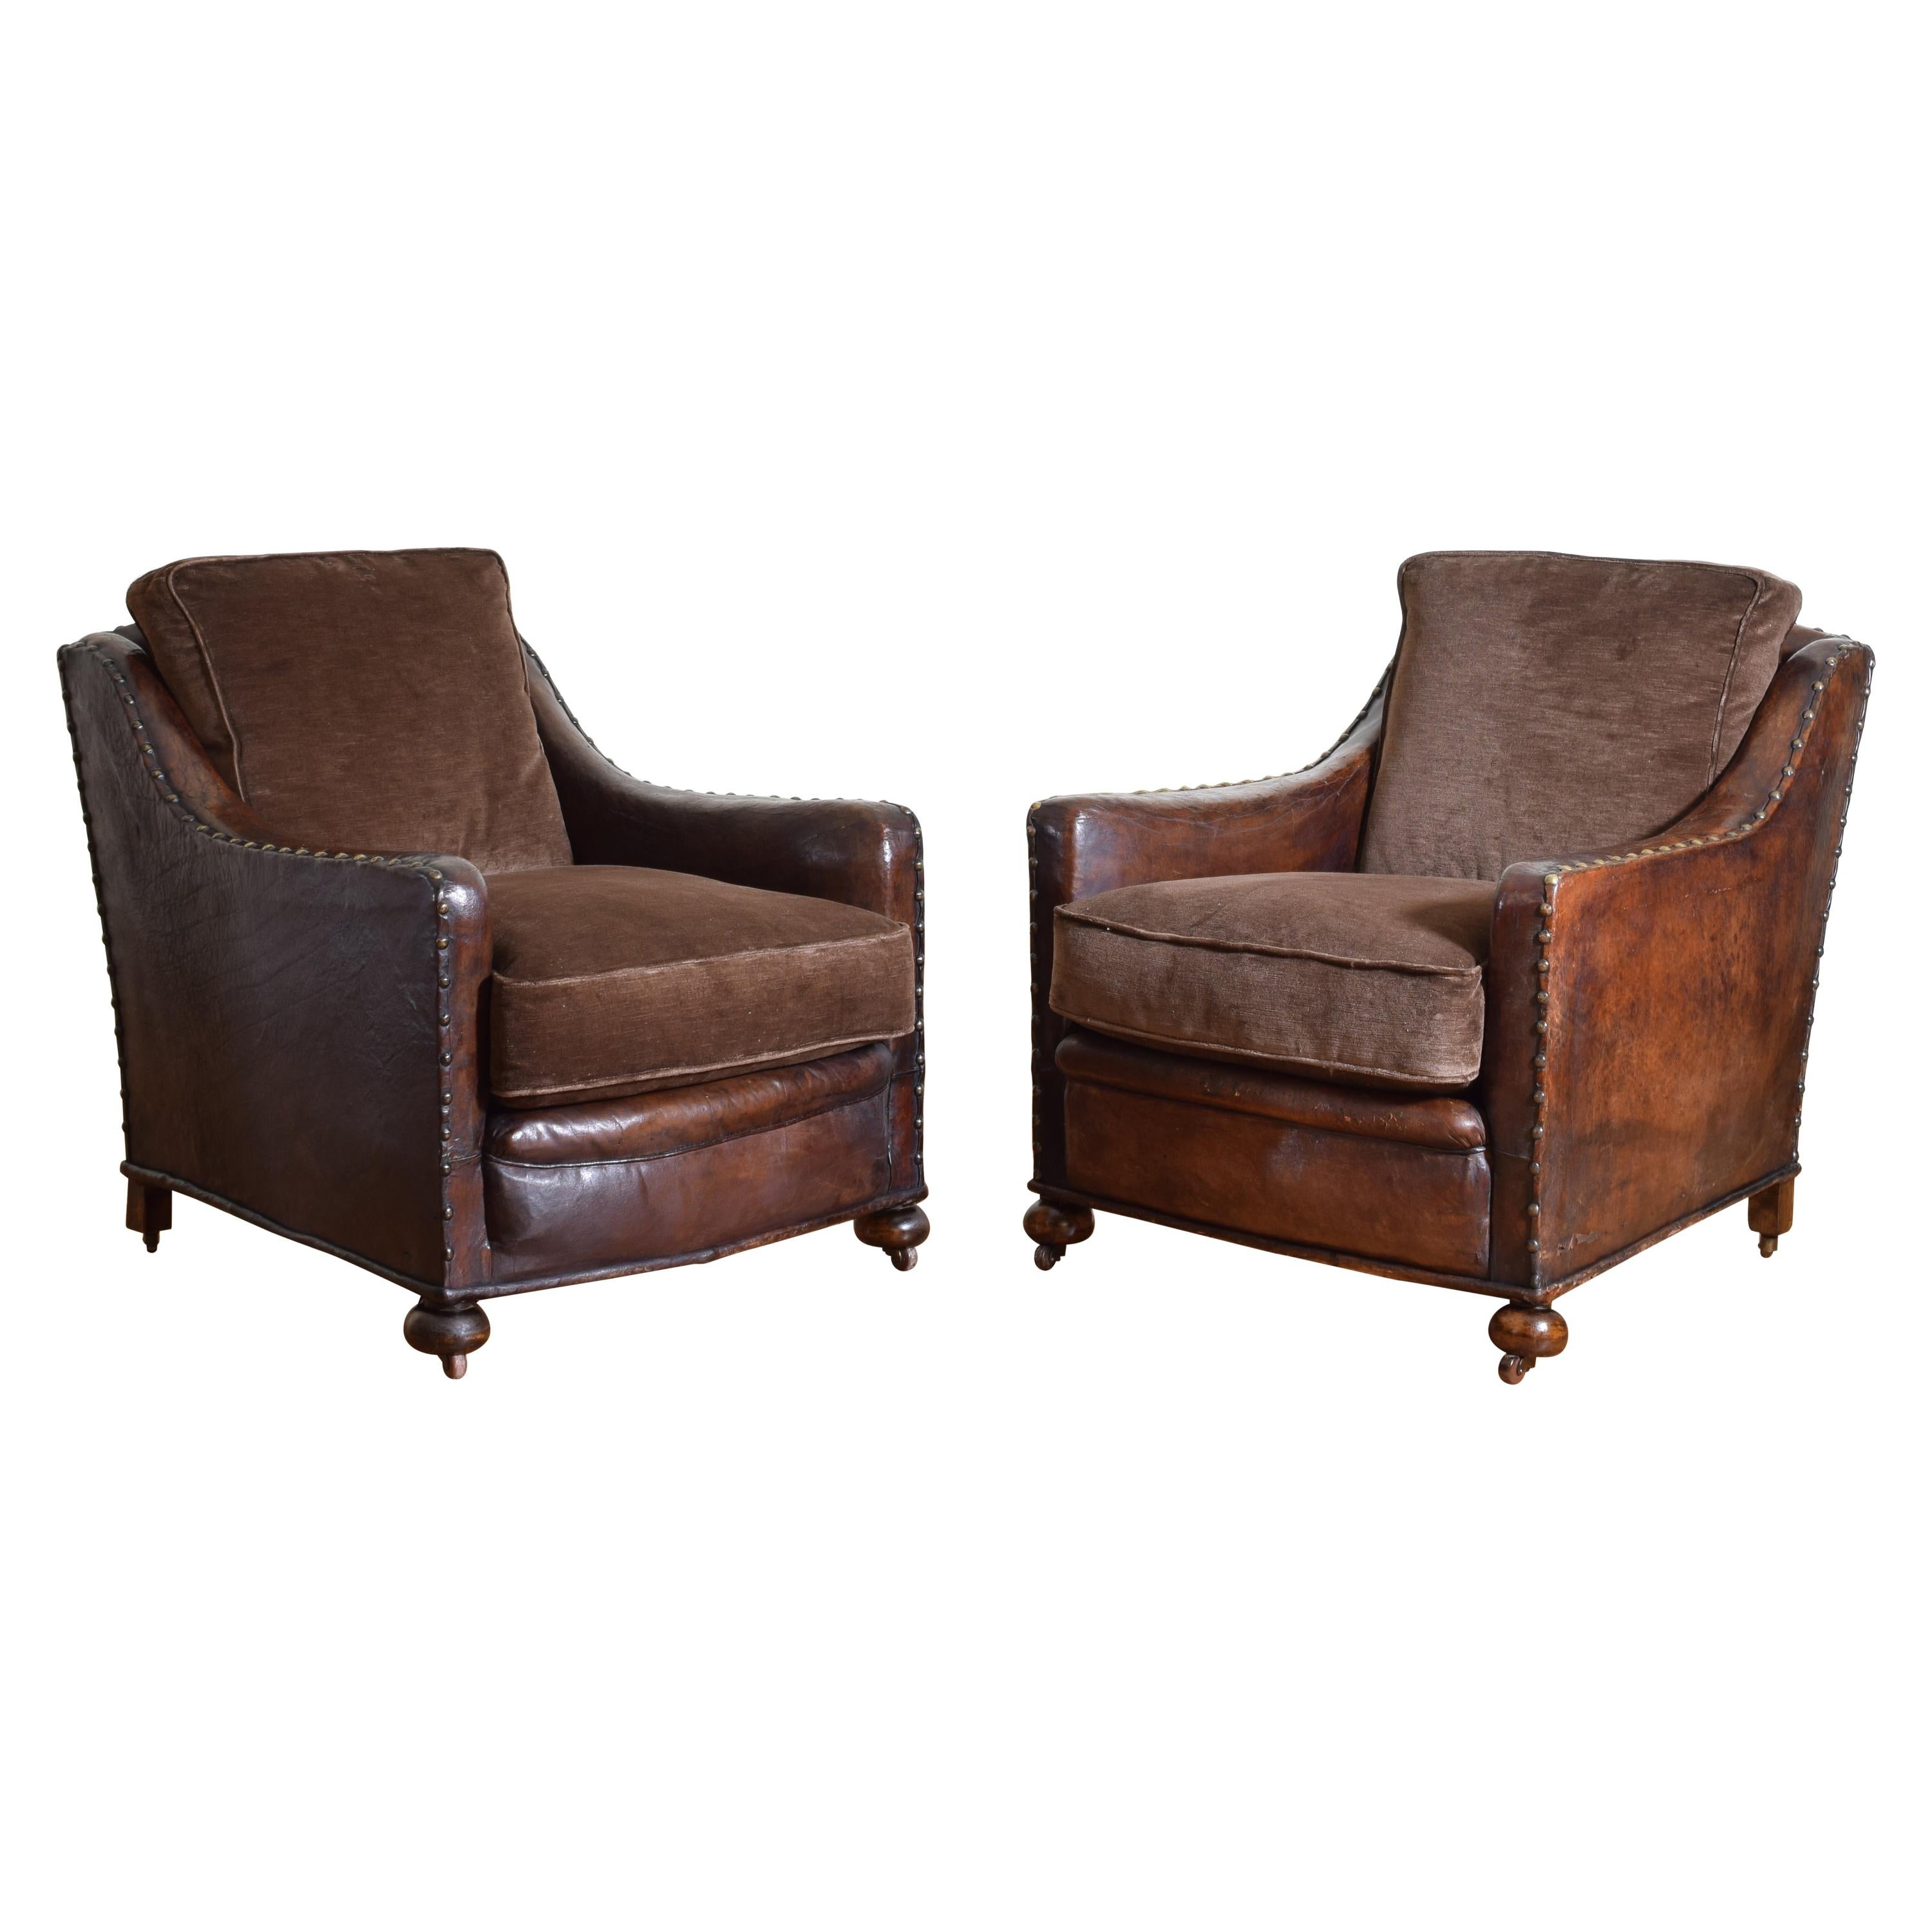 Pair of French Art Deco Period Leather and Velvet Upholstered Club Chairs 9